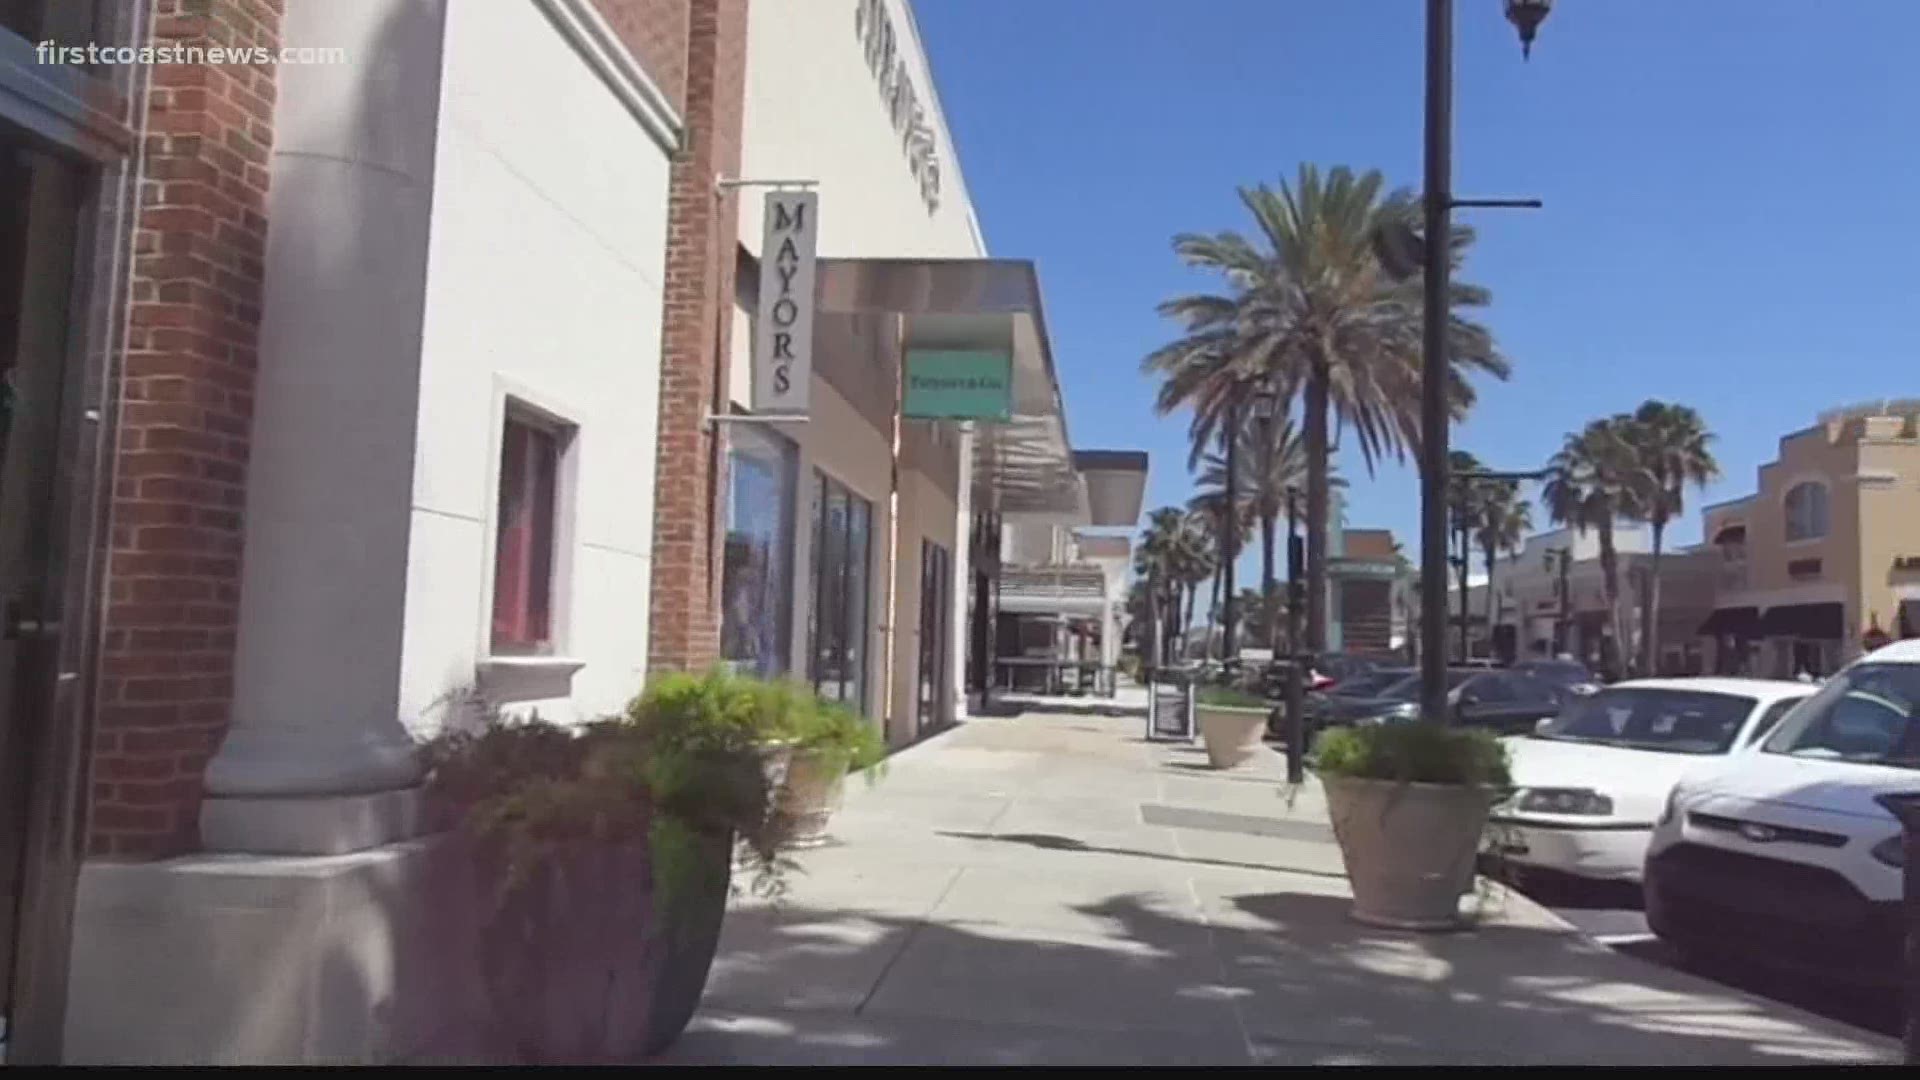 Town Center open for business, but some delay reopening